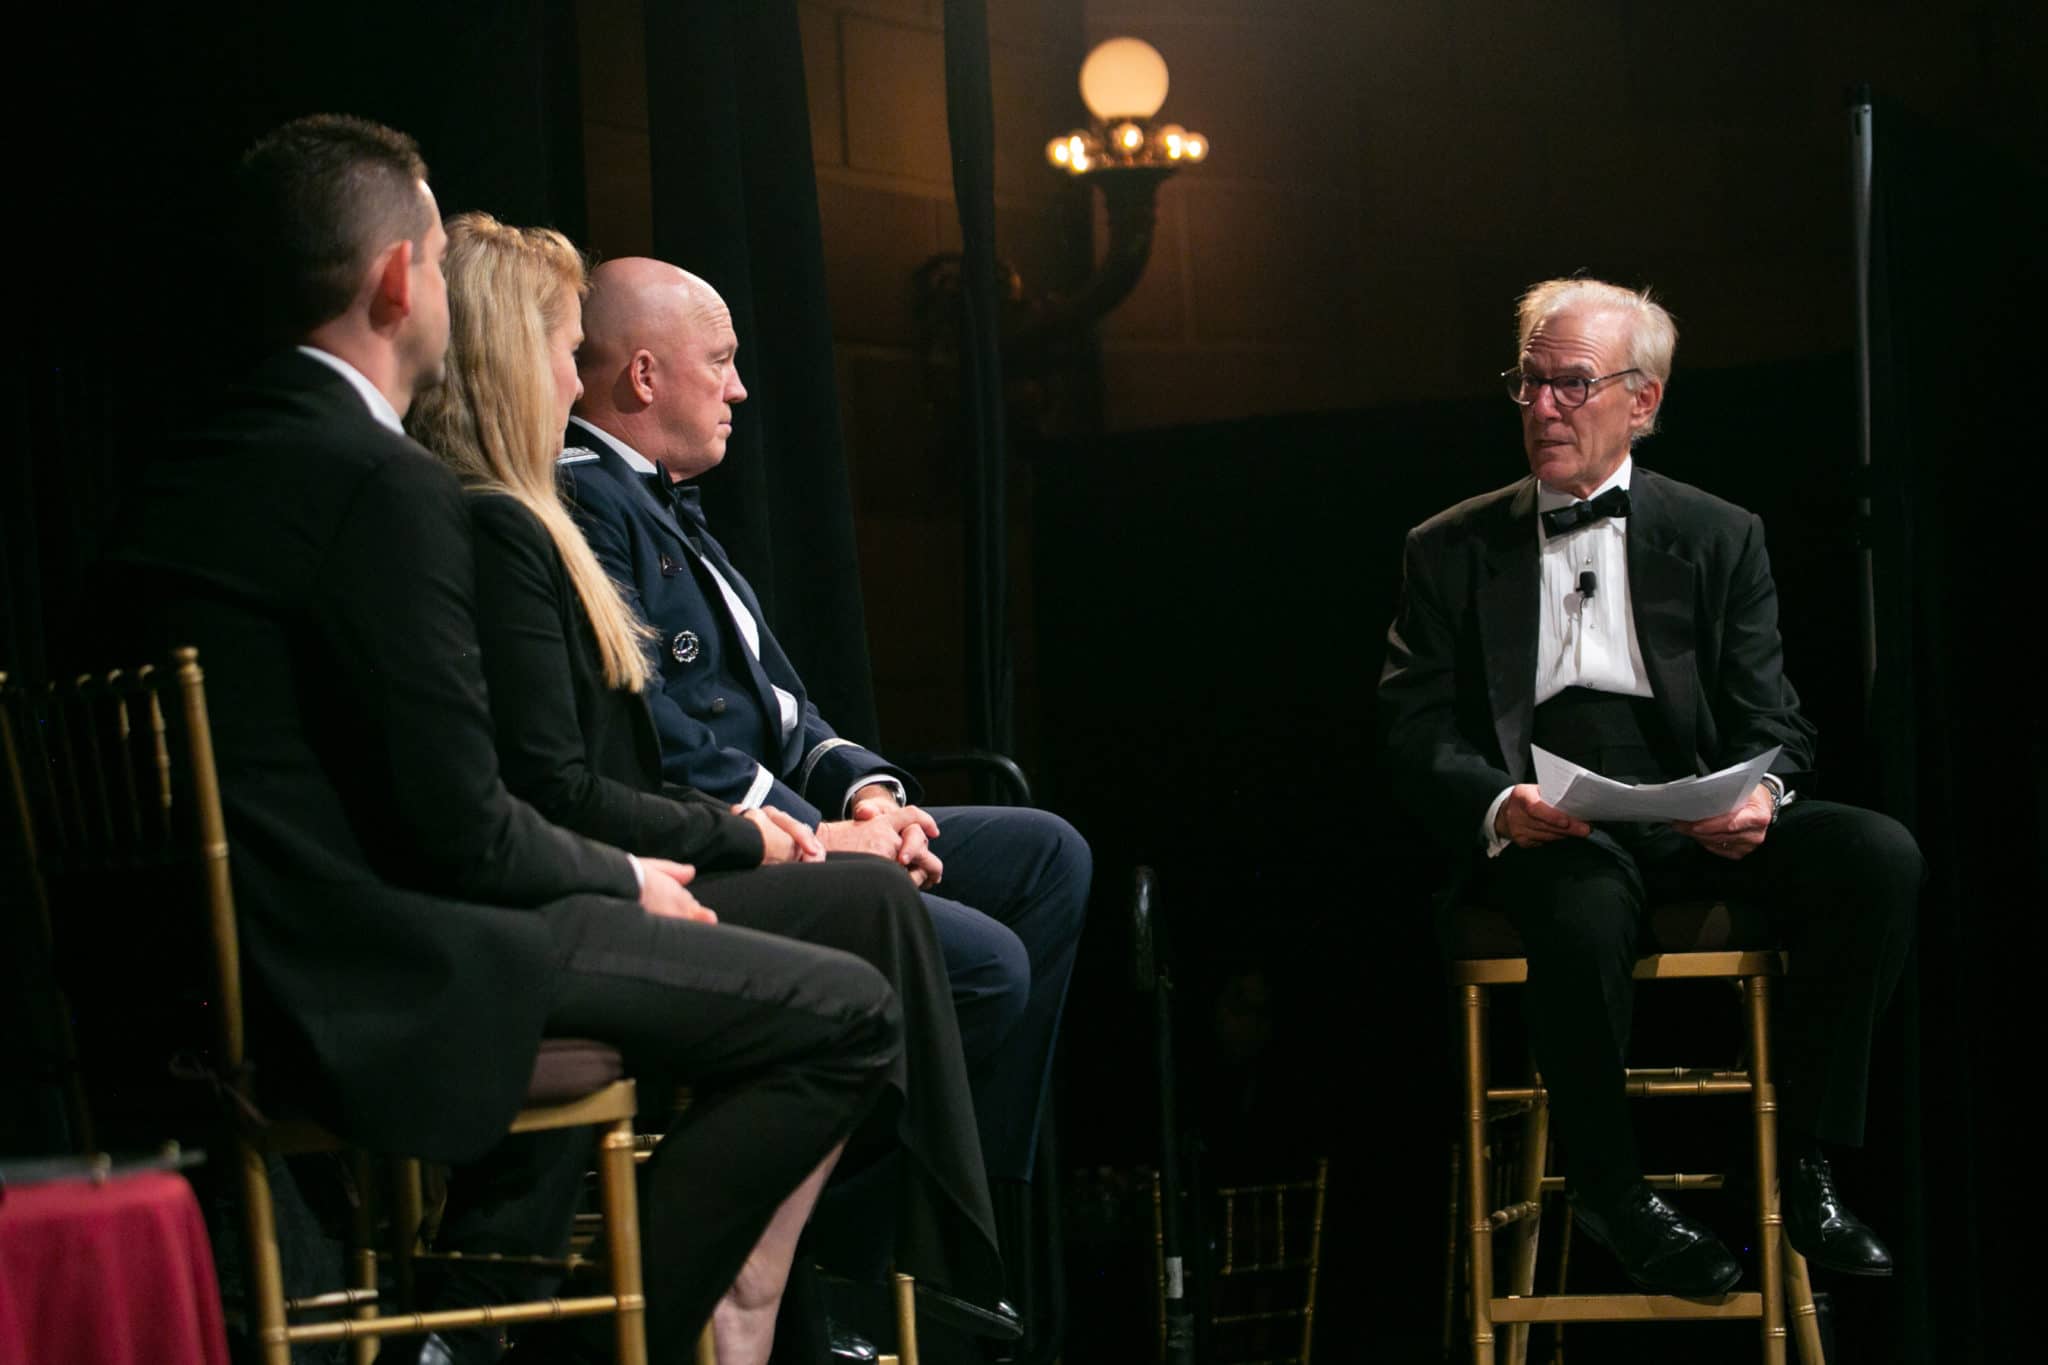 Fireside chat with Honorees at the 2021 Eisenhower Awards gala